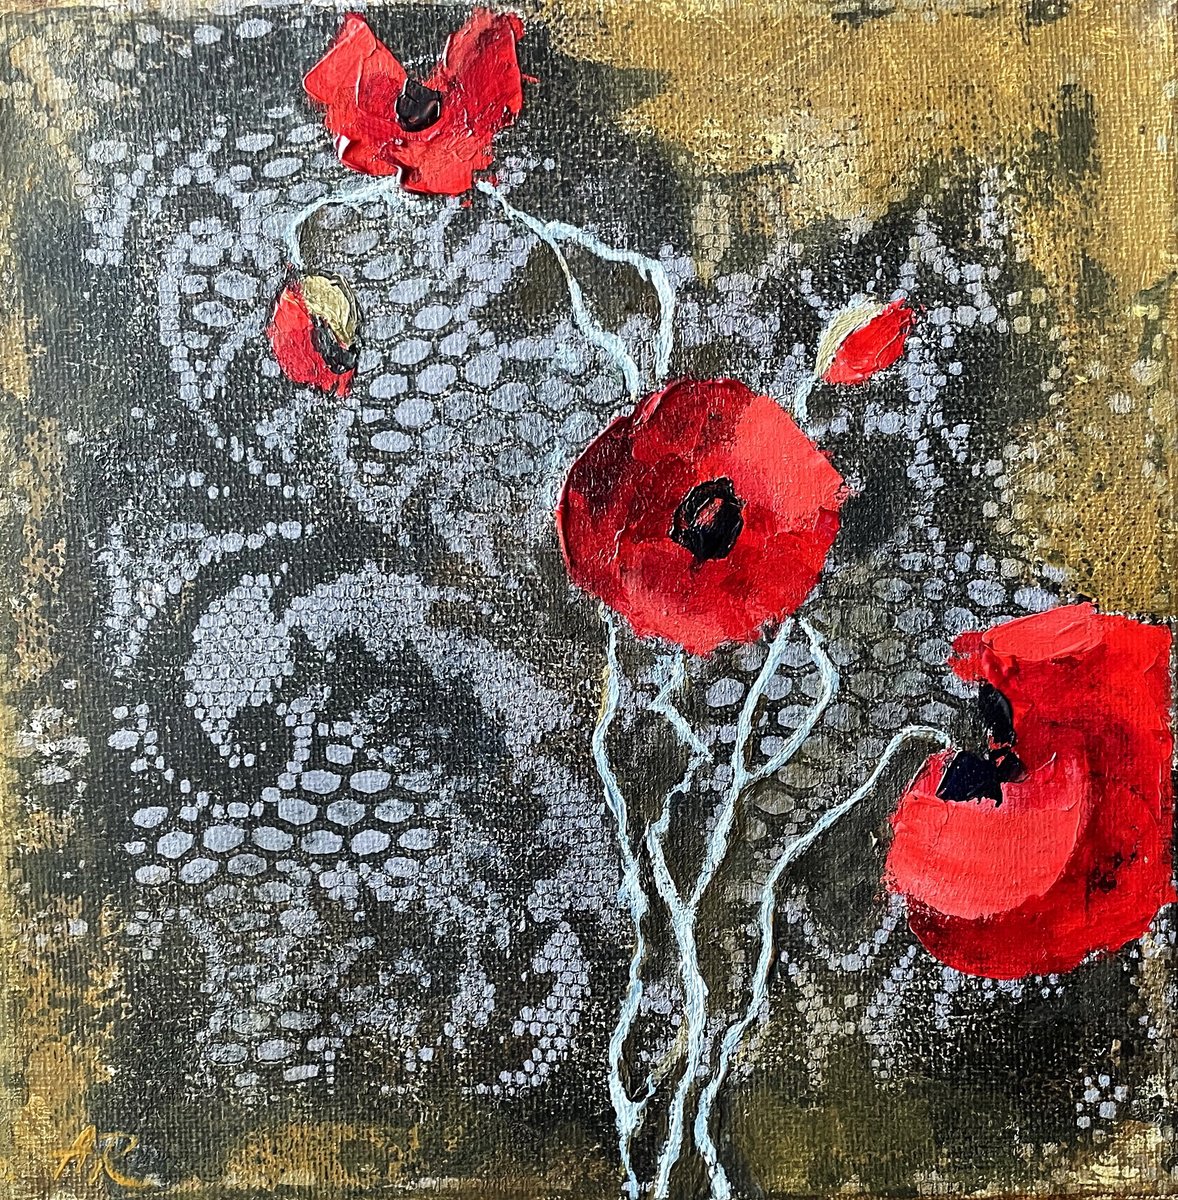 Poppies On Lace by Lena Ru